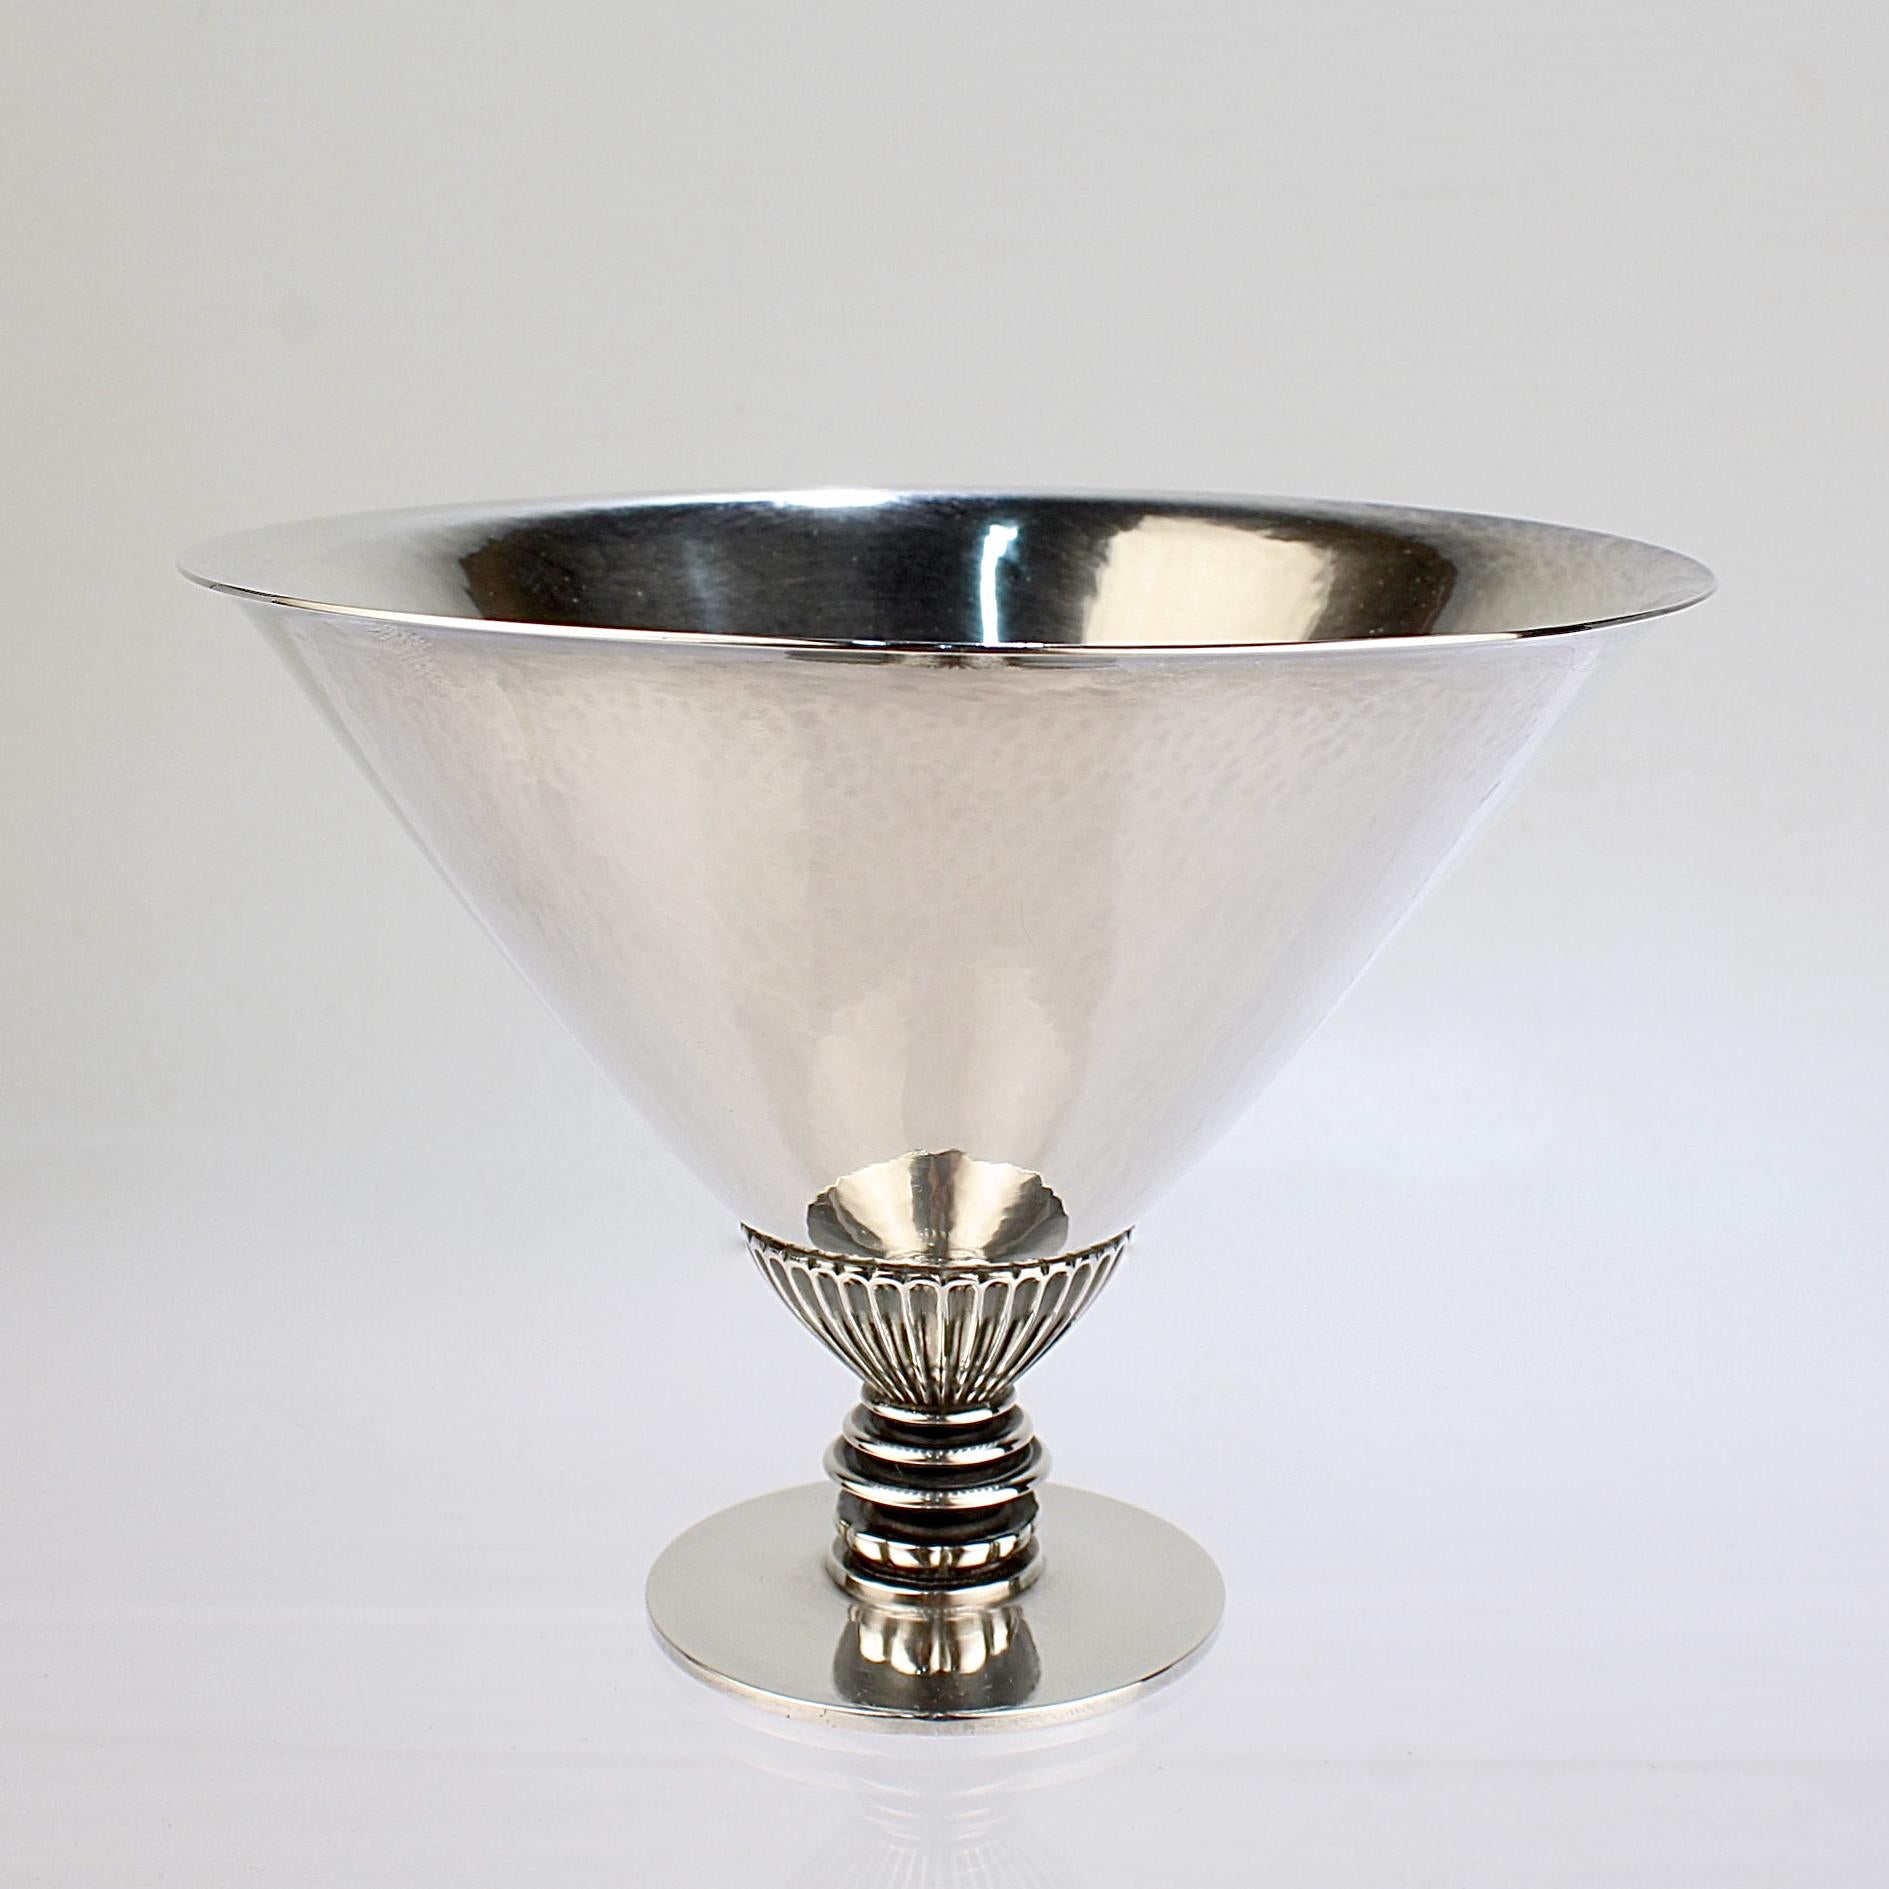 A fine Georg Jensen sterling silver bowl.

Model no. 259

Designed by Gundorph Albertus (1887 - 1970).

With a hand-hammered triangular bowl that tapers to a fluted and graduated pedestal supported by a disc foot. 

Simply a wonderful